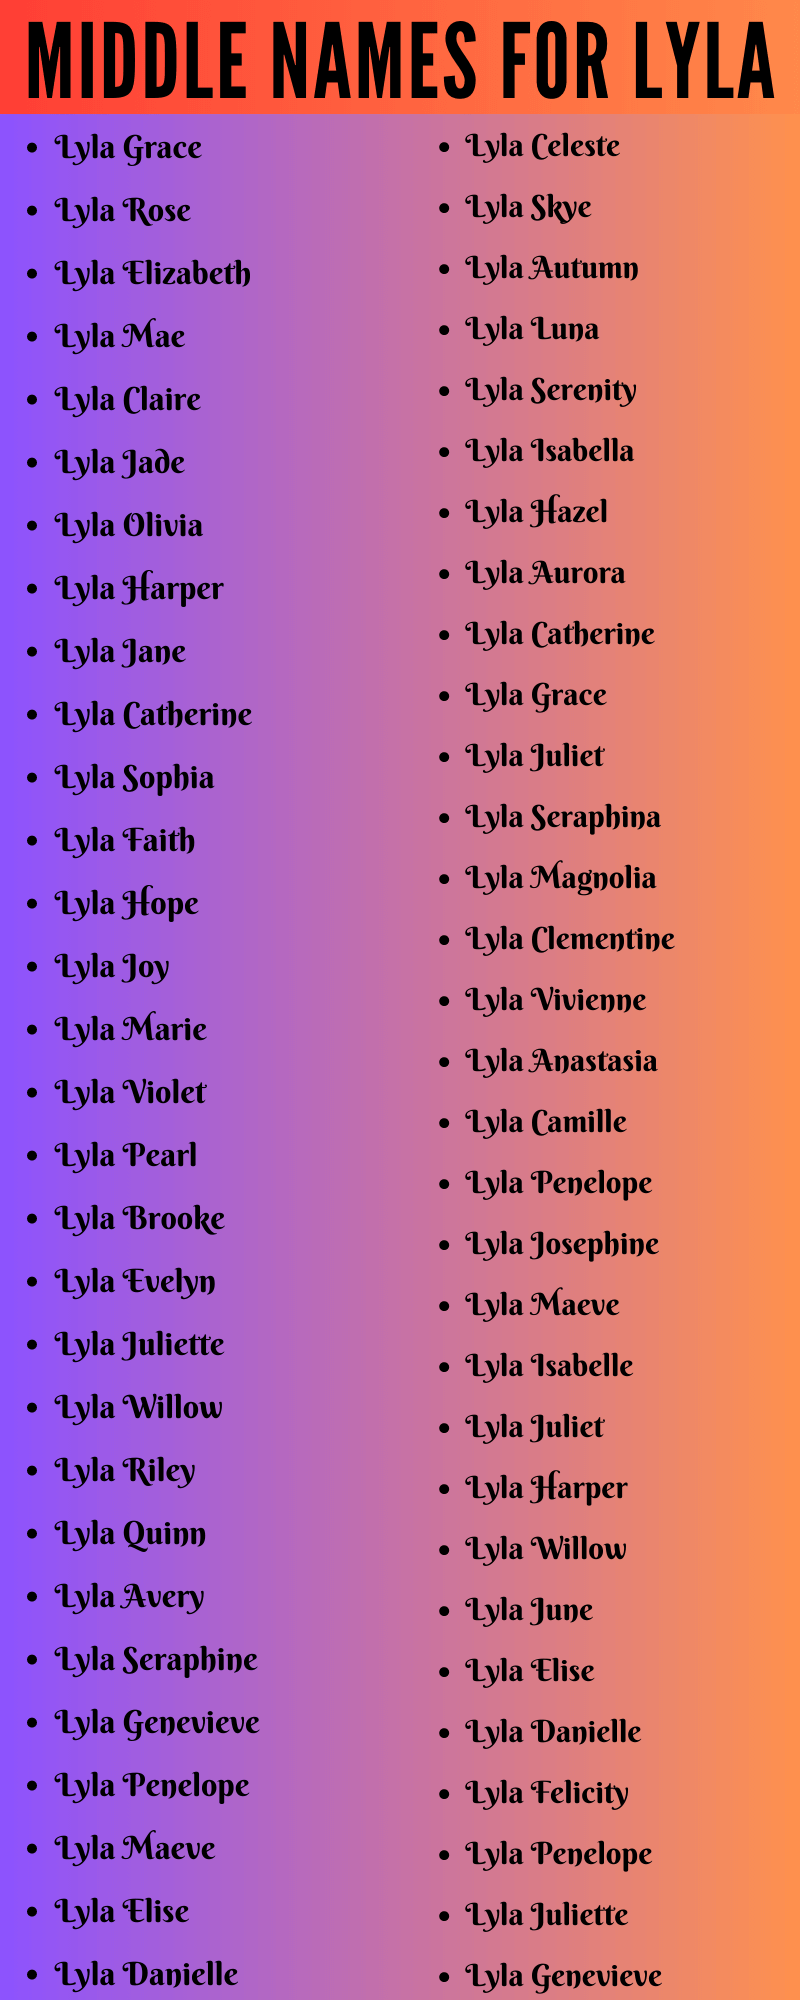 400 Catchy Middle Names For Lyla That You Will Love